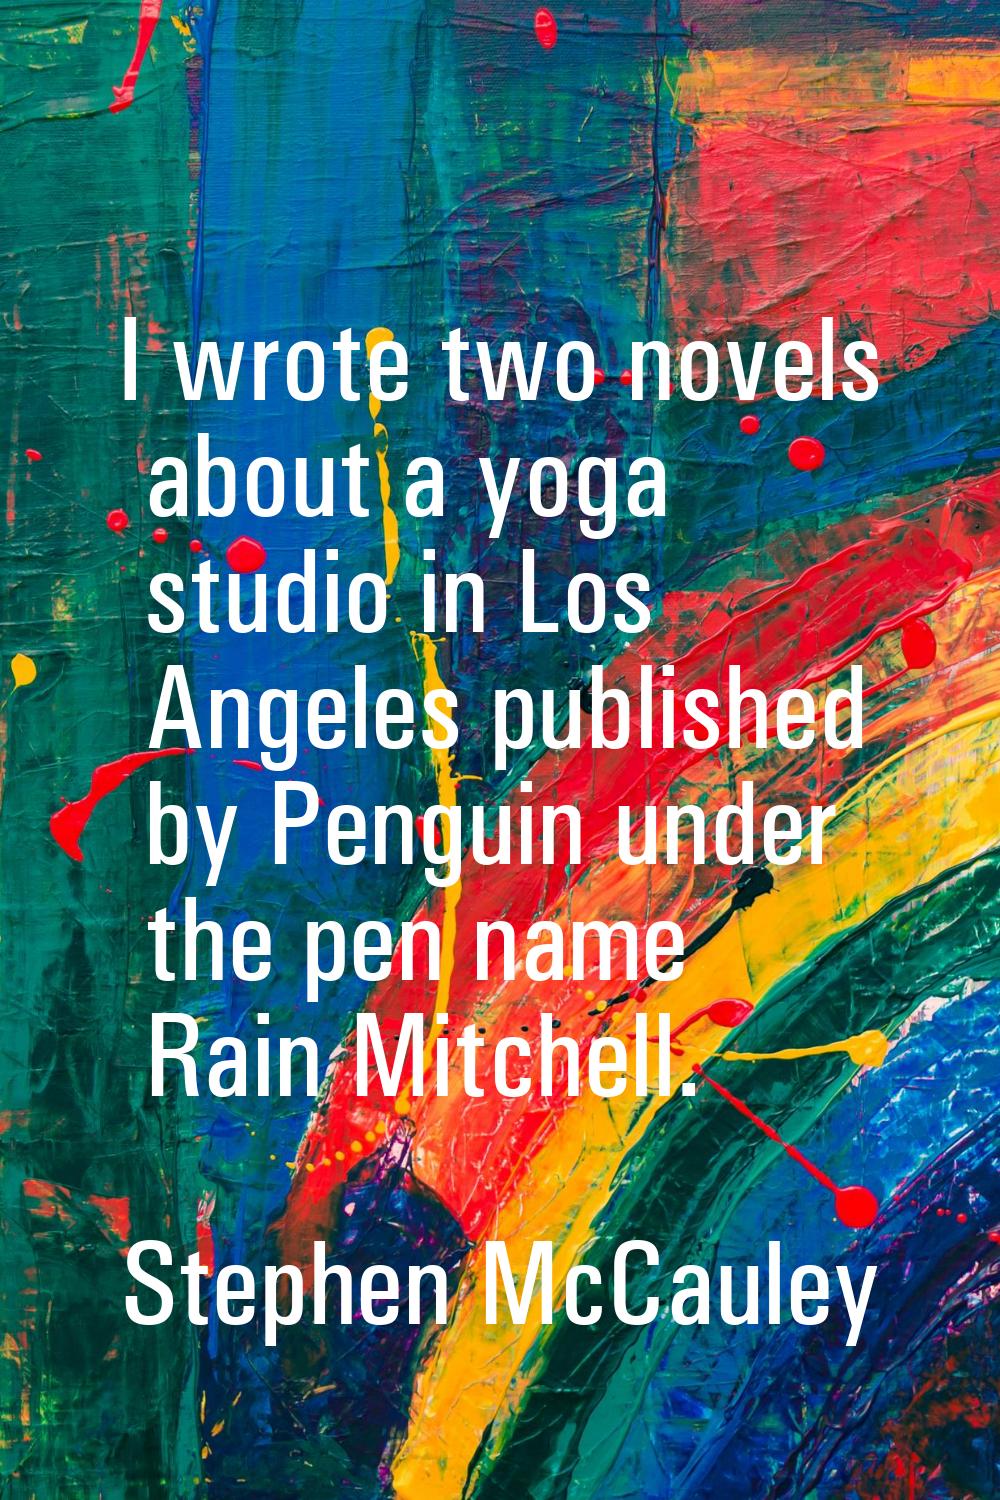 I wrote two novels about a yoga studio in Los Angeles published by Penguin under the pen name Rain 